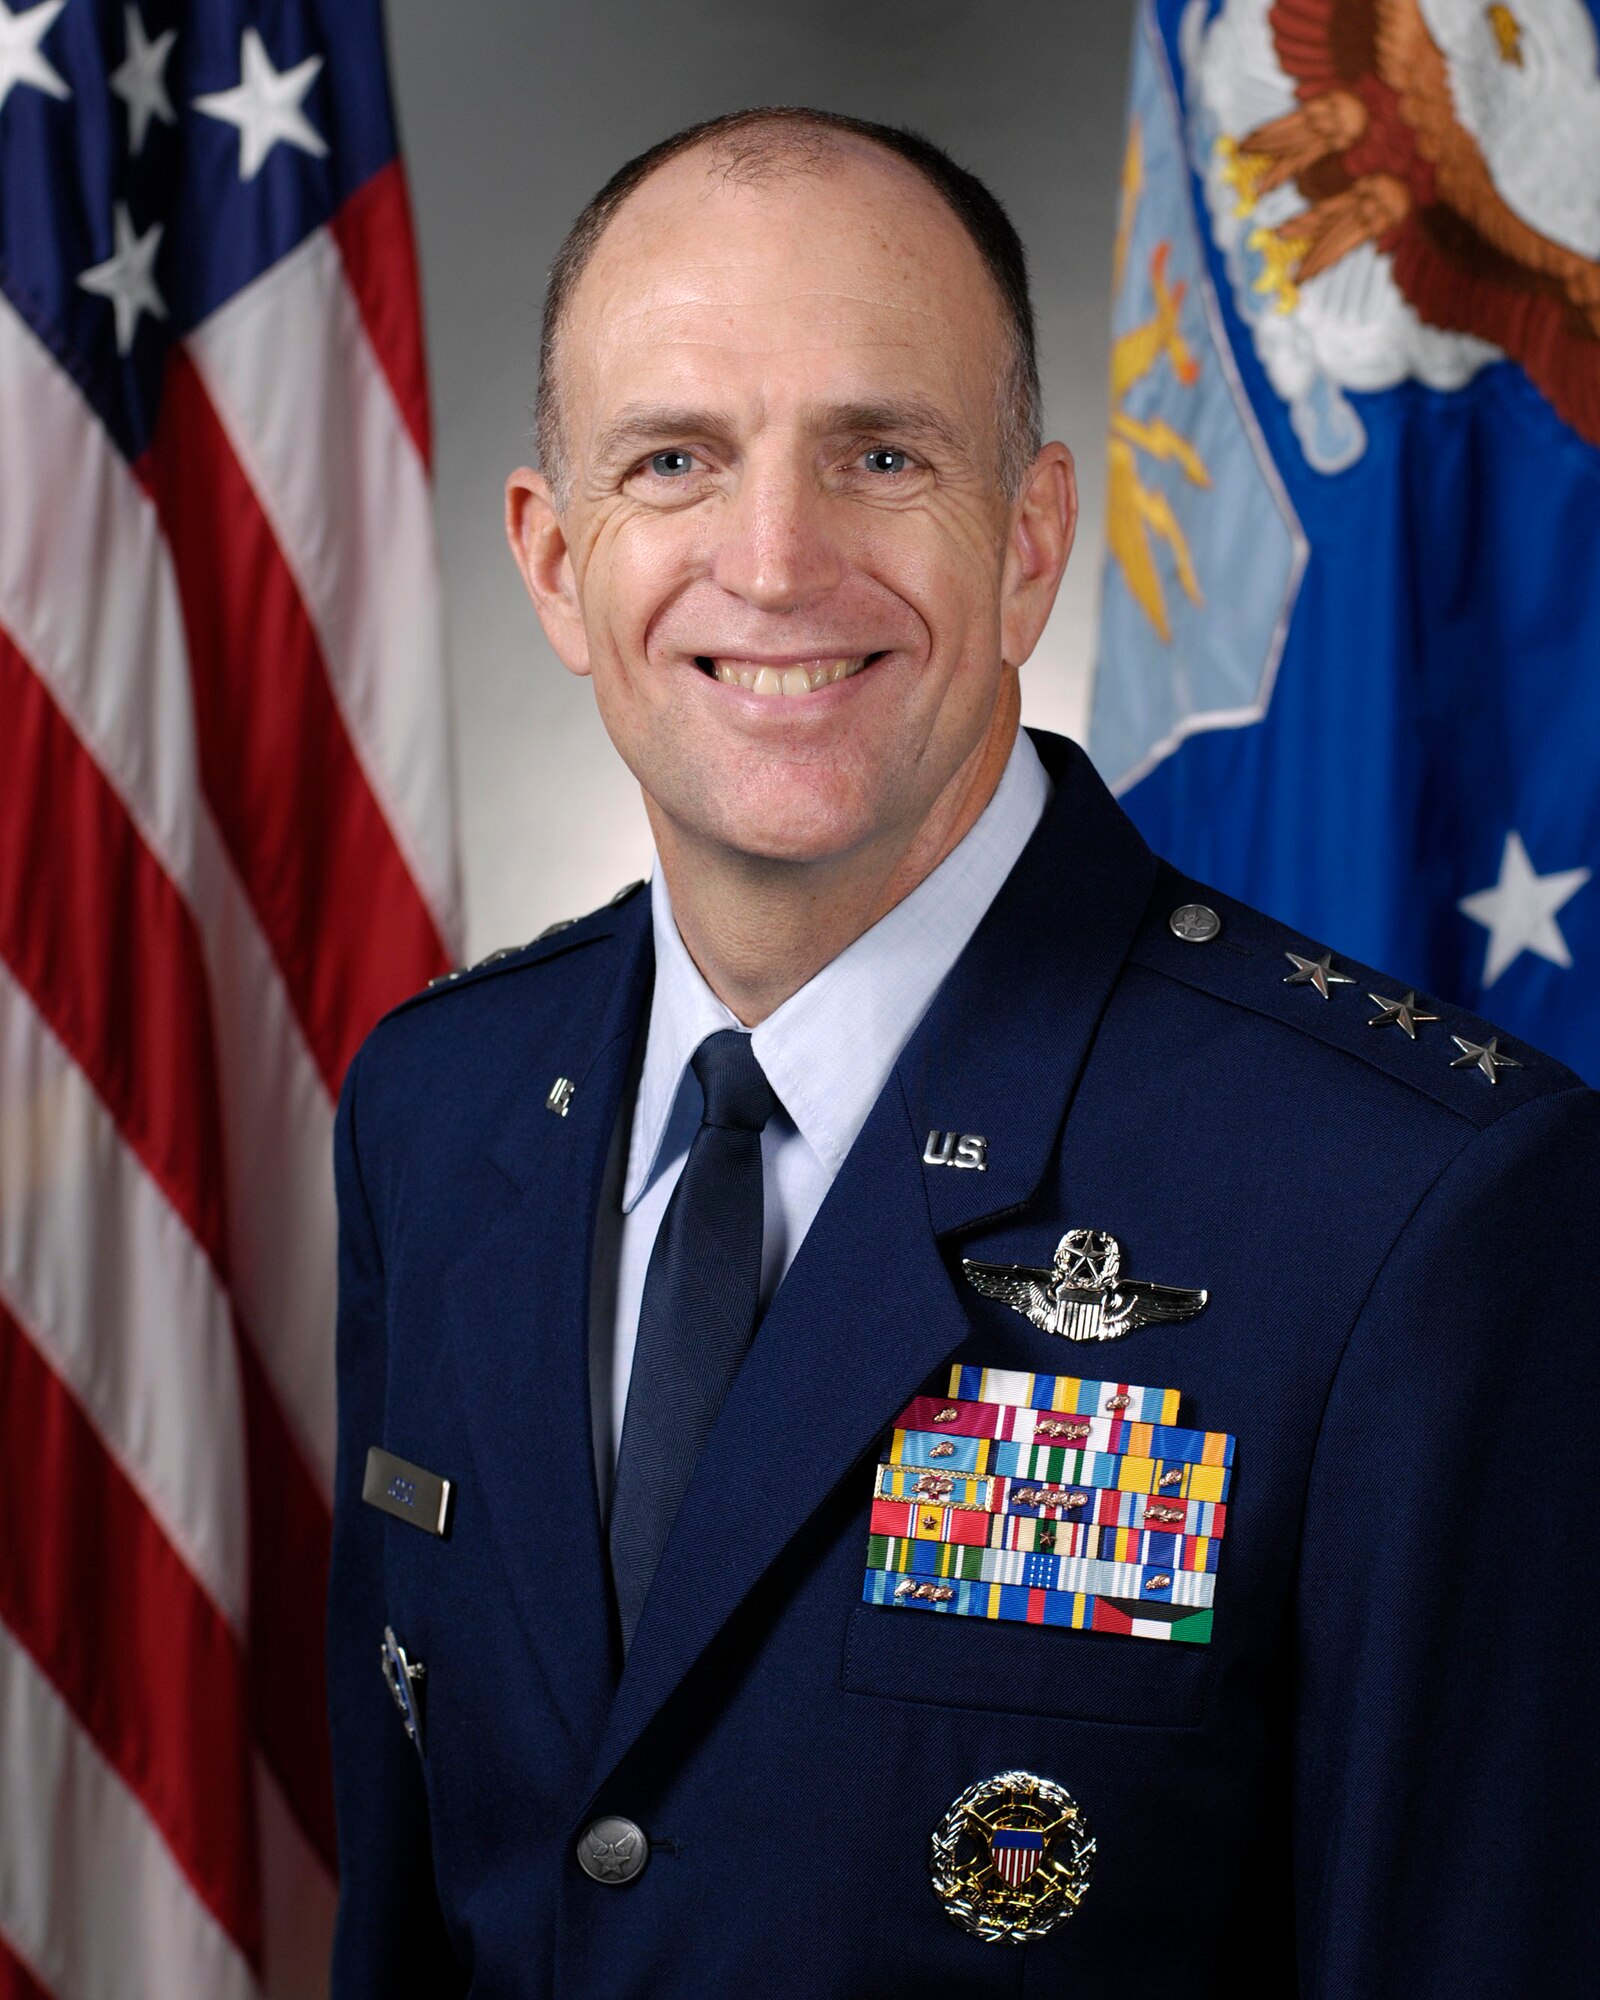 Lt. Gen. Ralph J. Jodice II is Commander, Allied Air Component Command Headquarters Izmir, Turkey, and Commander, 16th Air Expeditionary Task Force, U.S. Air Forces in Europe, Izmir, Turkey.